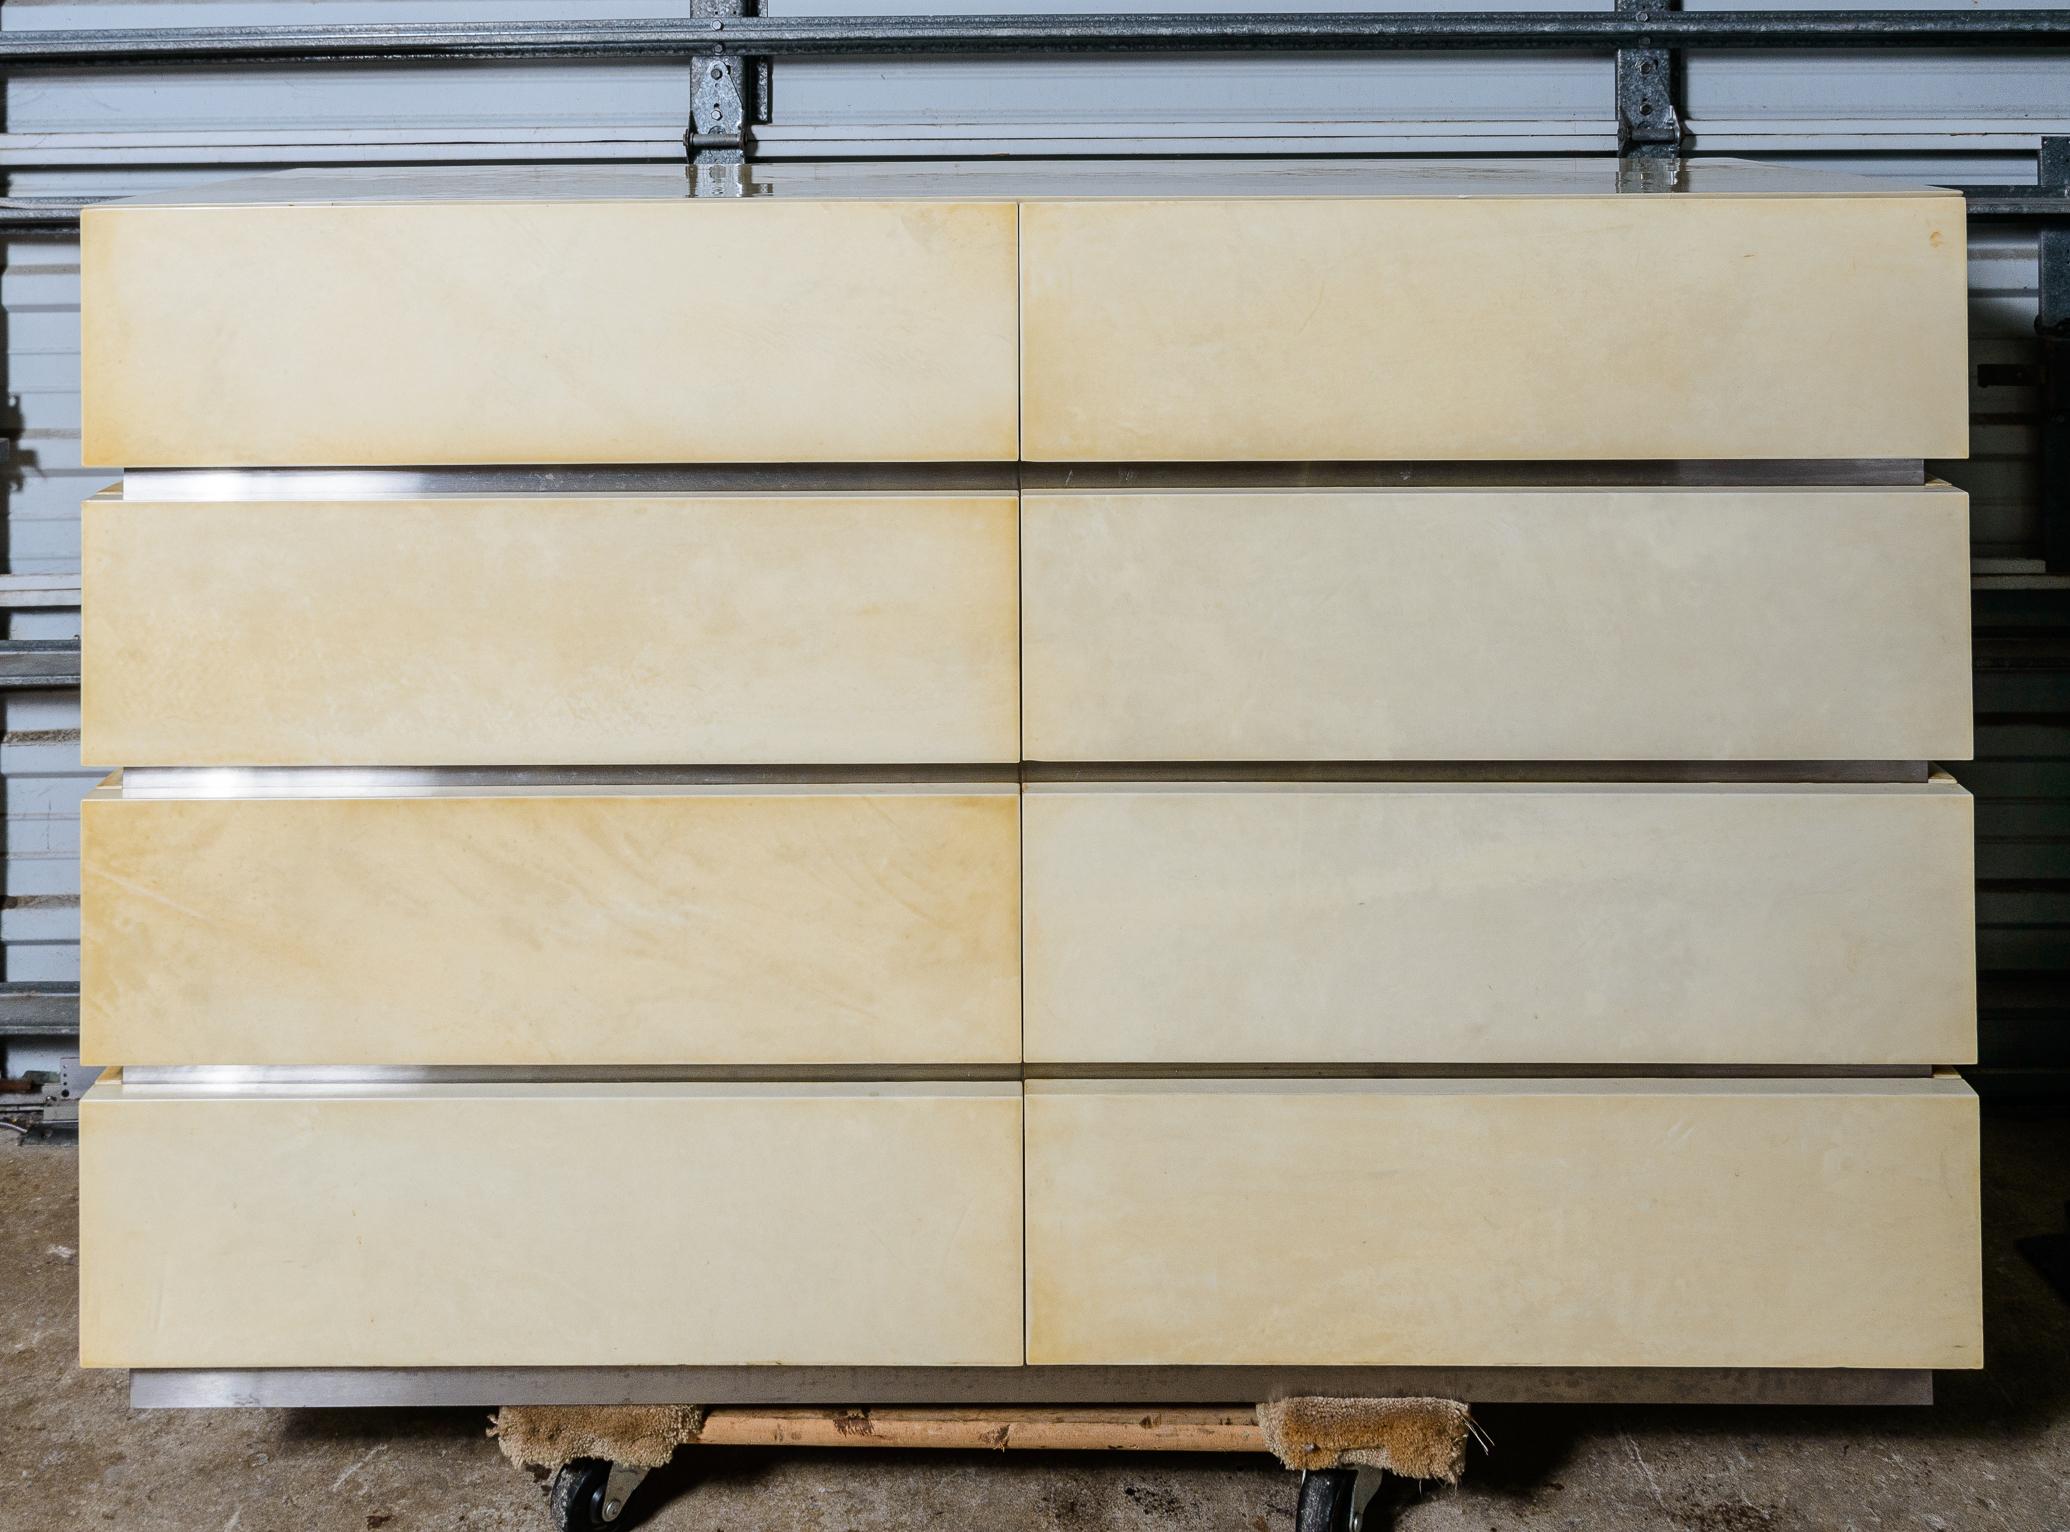 An extremely rare cabinet by Karl springer
Goatskin and steel
Subtle recessed drawer surrounds
A good selection of cream colored goatskin

